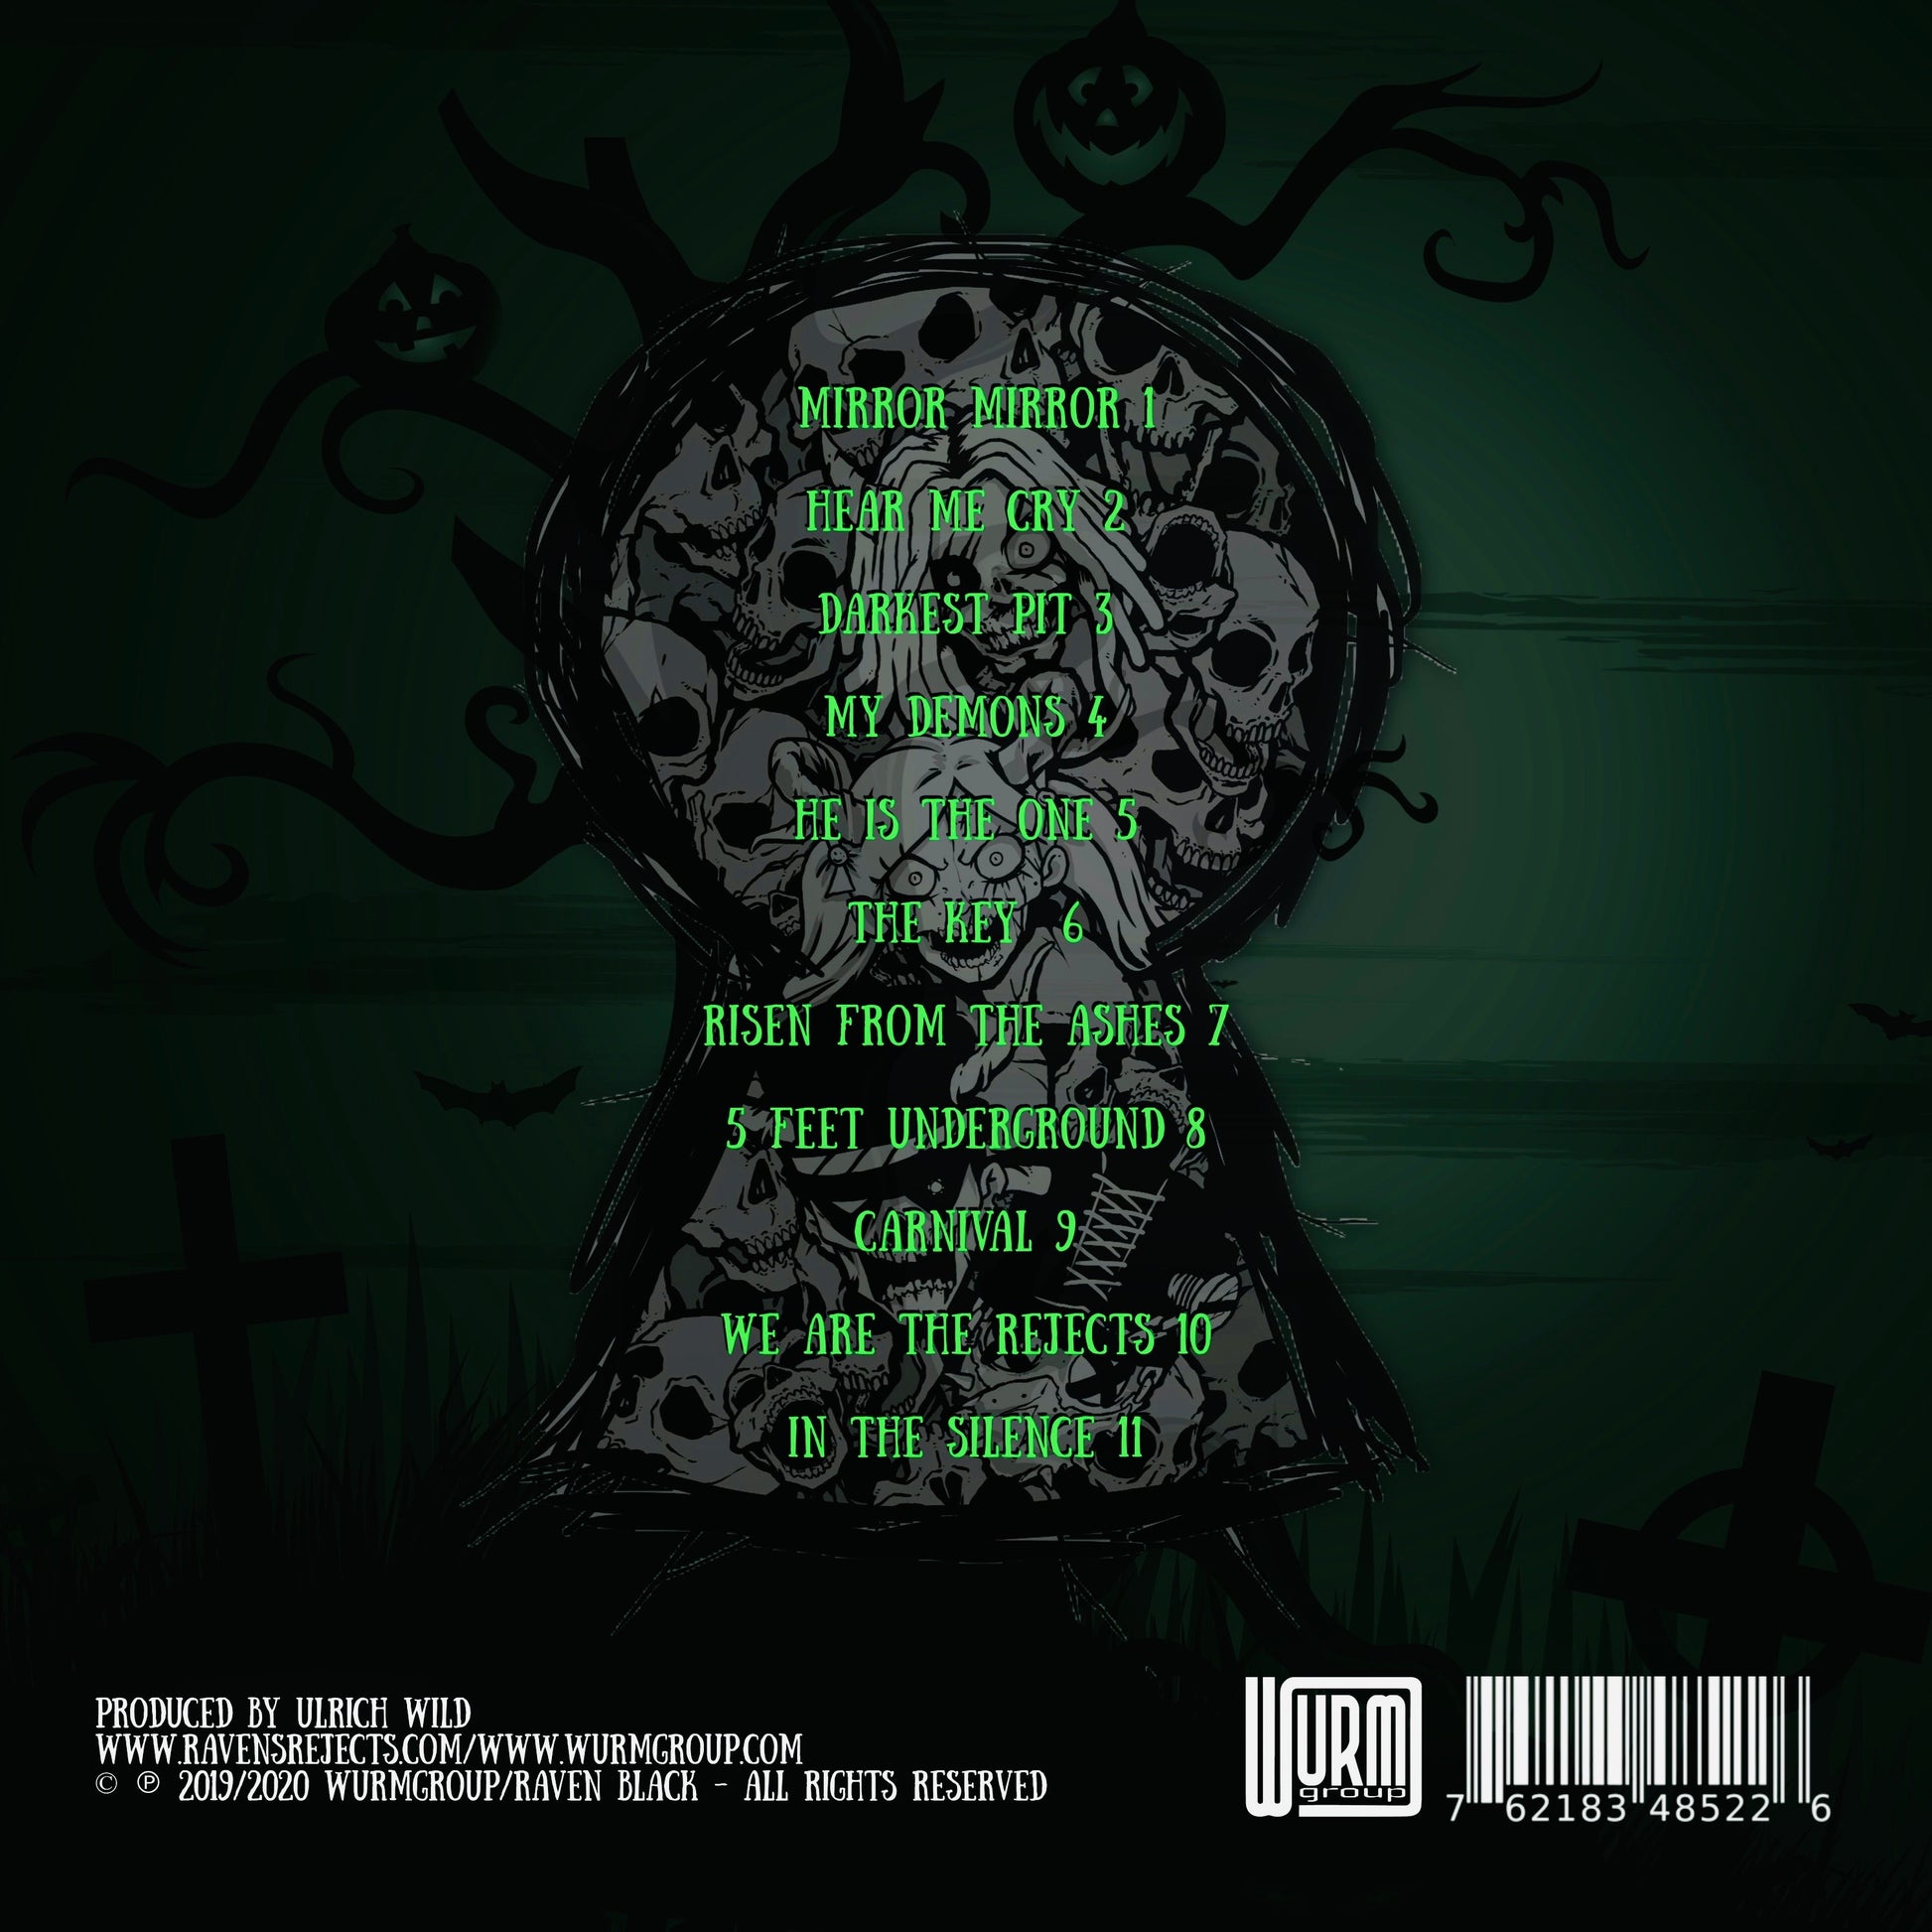 Raven Black - The Key - special edition CD back -  green